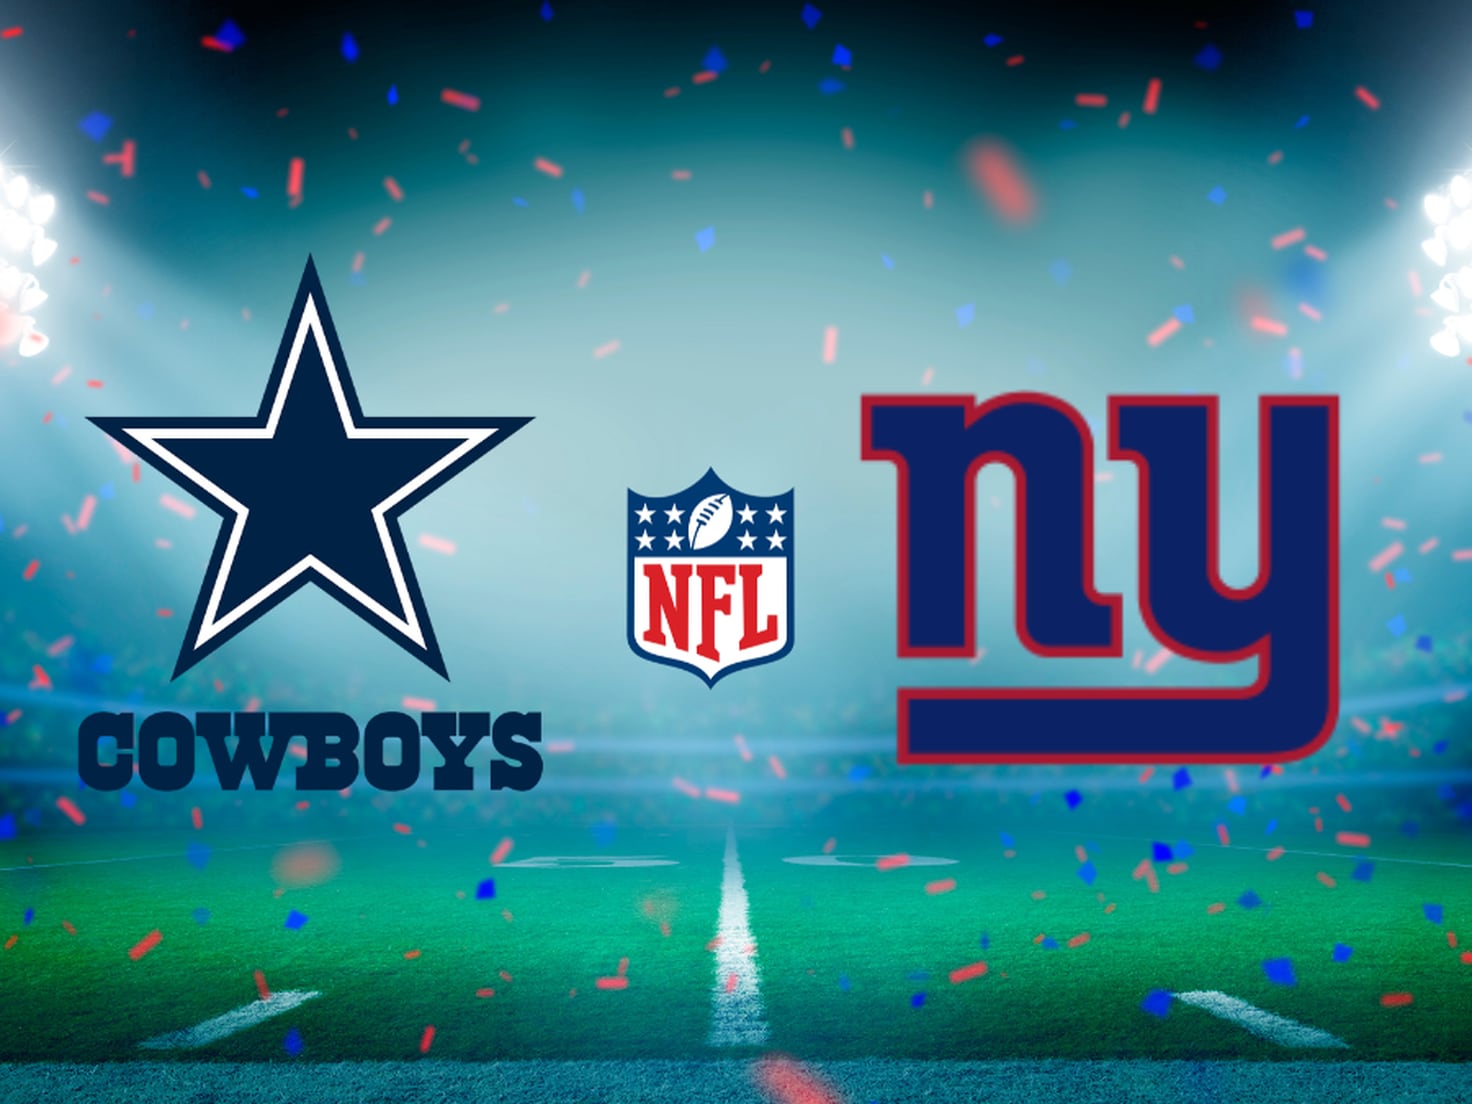 Dallas Cowboys vs New York Giants: times, how to watch on TV, stream online